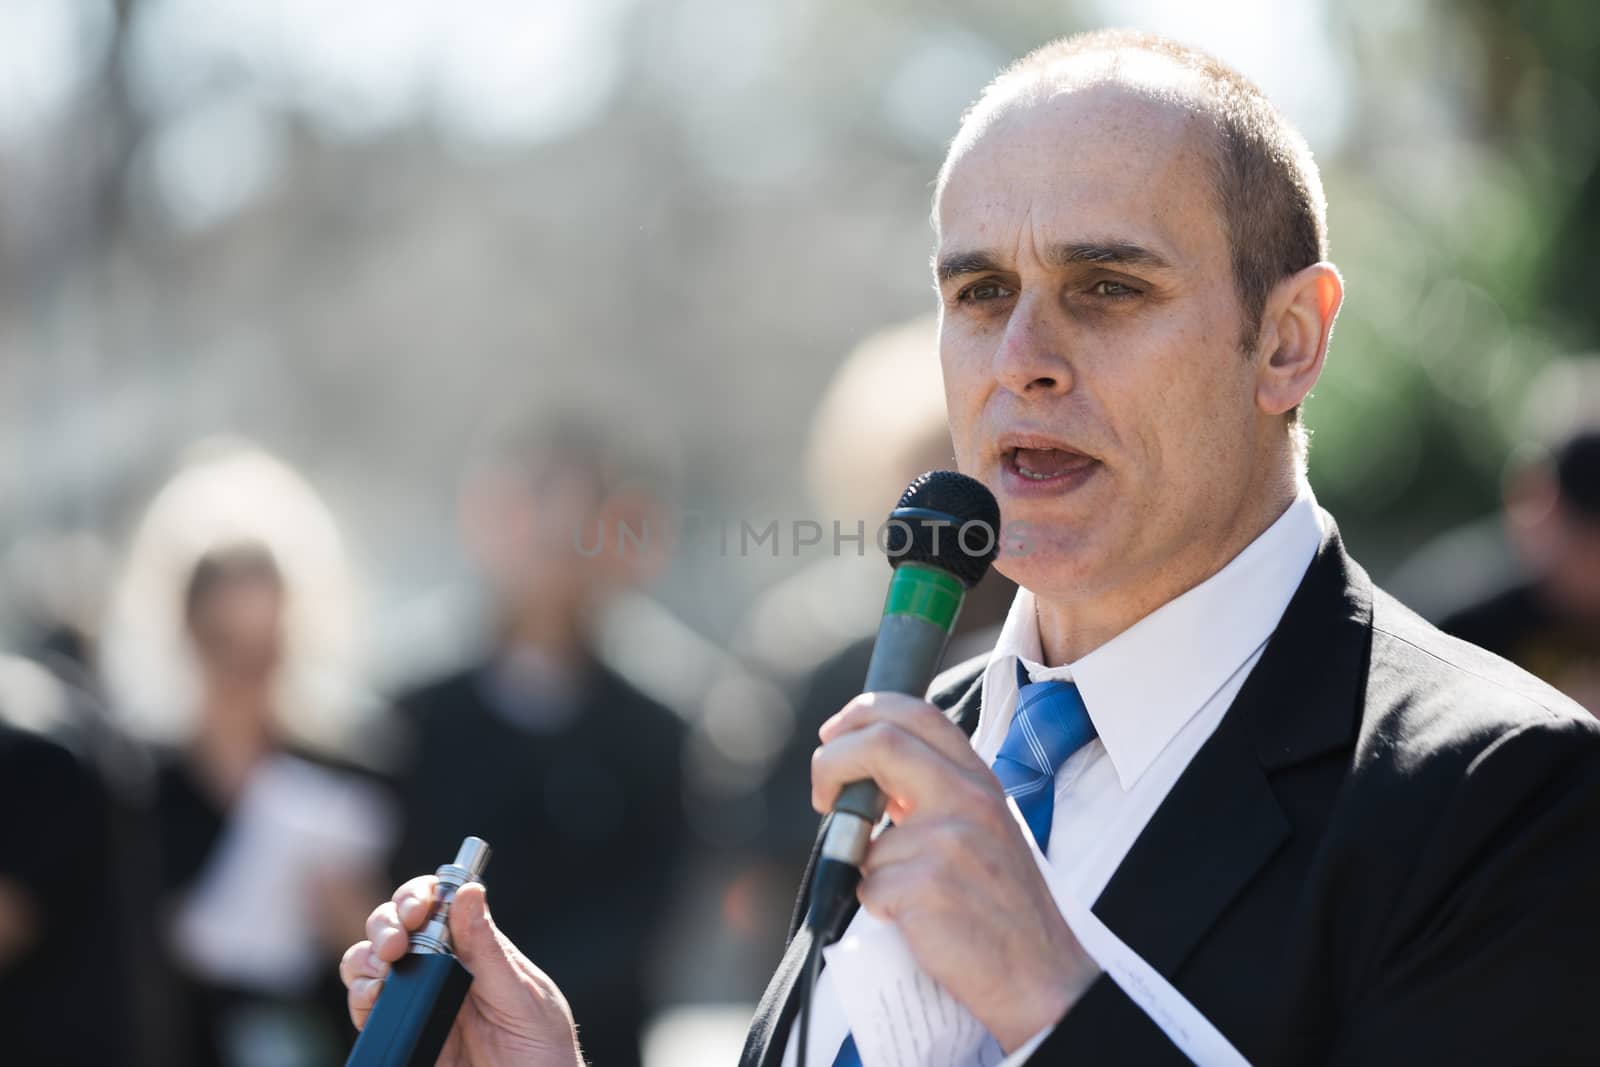 Pro E-Cig Protestors gather outside Parliament house in Melbourn by davidhewison